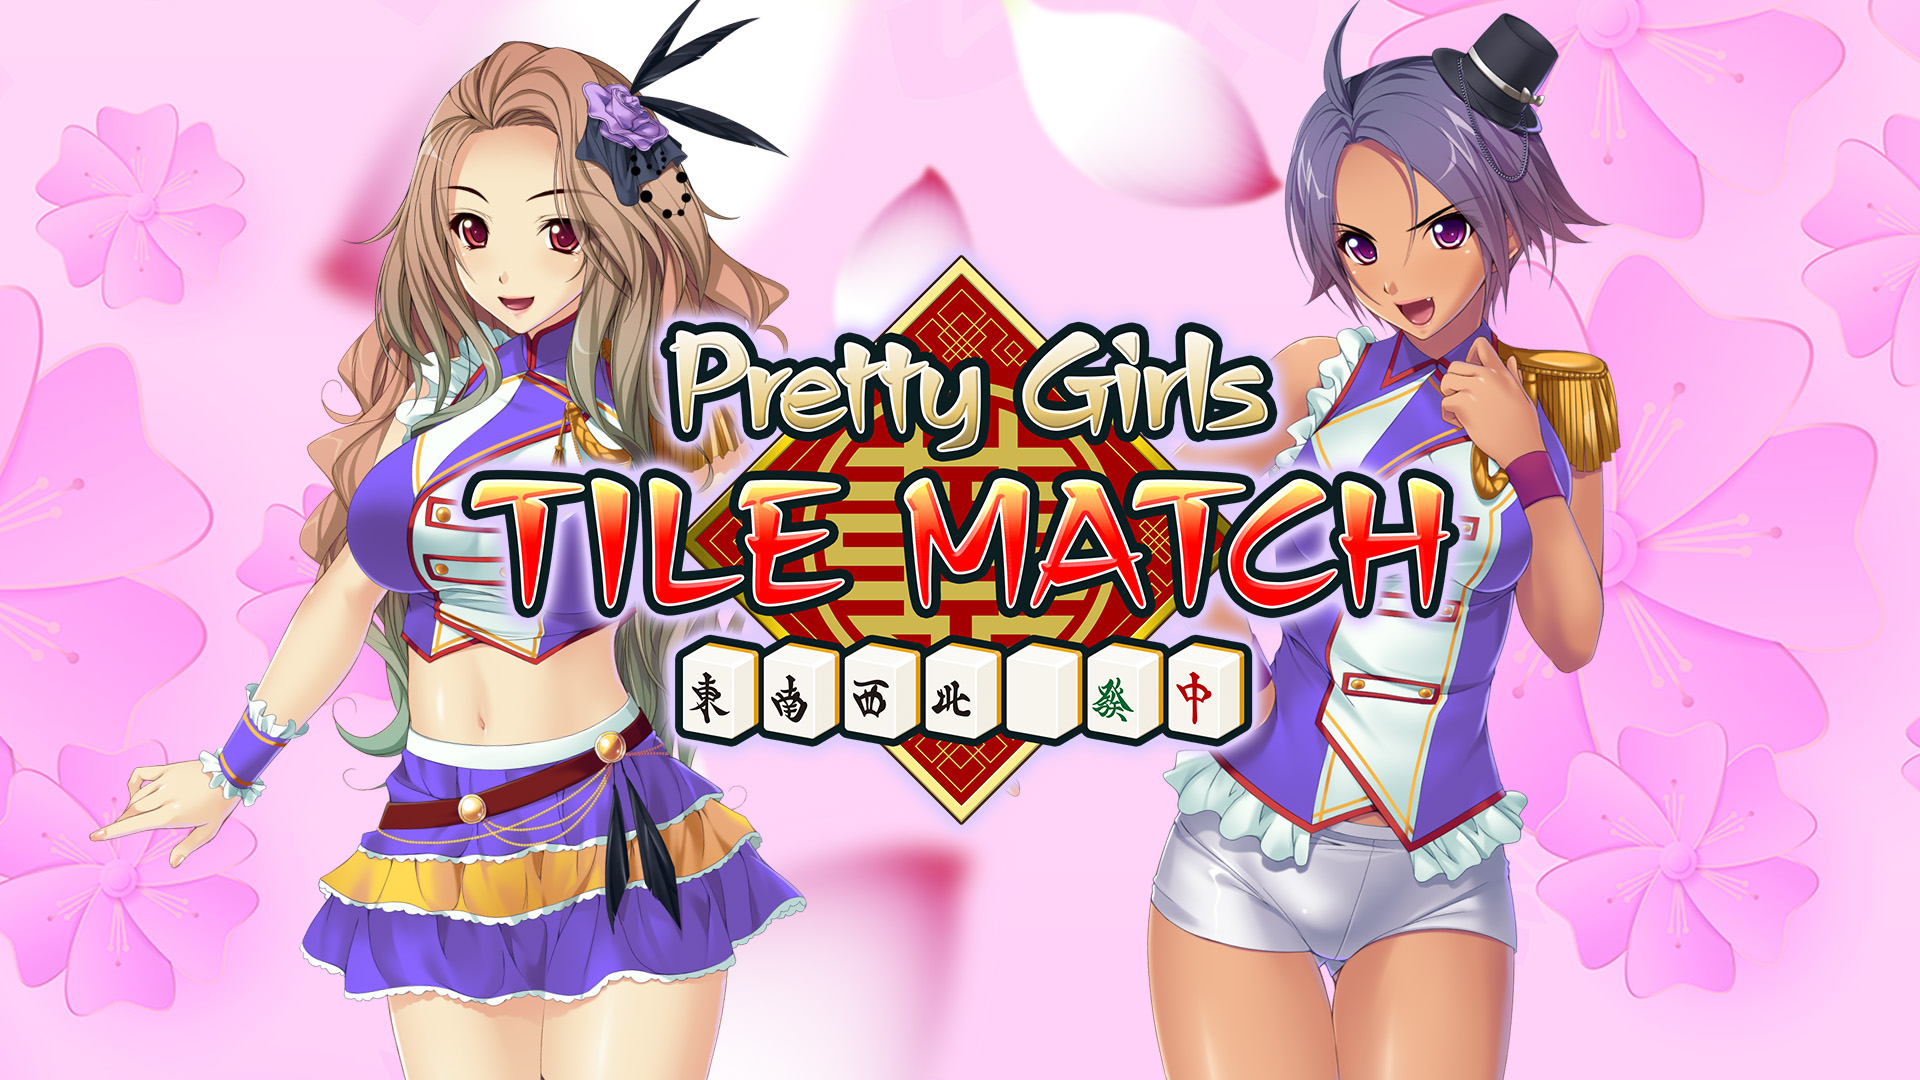 The key art for Pretty Girls Tile Match, featuring two girls and the game's logo.